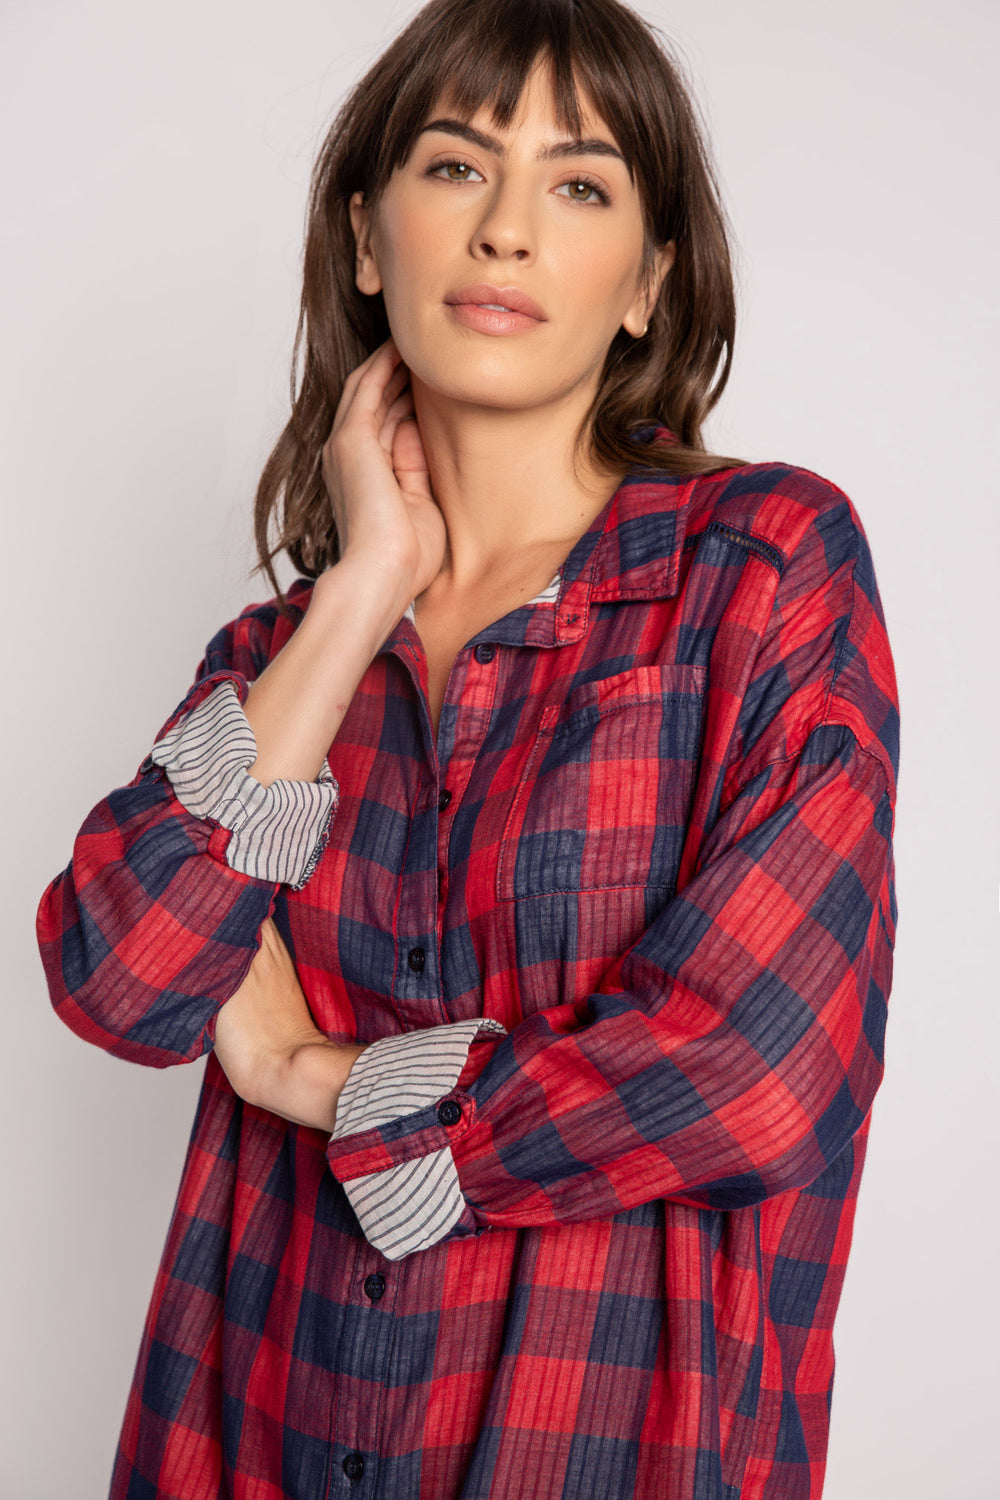 Navy & red plaid nightshirt with mini button front. Soft woven, light fabric. Roll-up sleeves. (7249830150244)